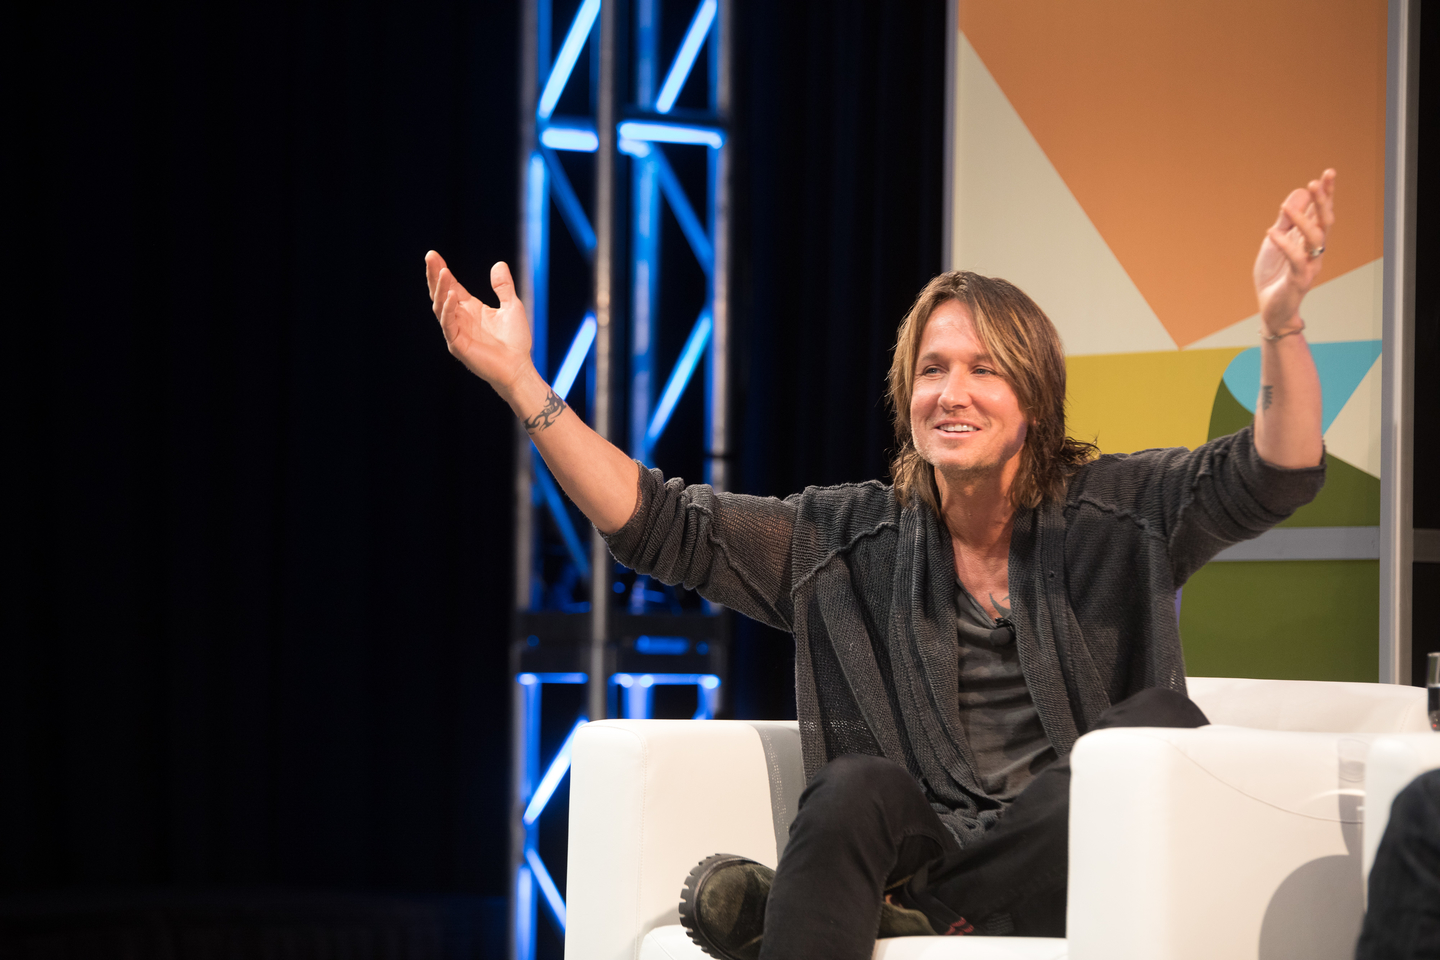 Keith Urban at his Featured Session. Photo by Michael Caufield